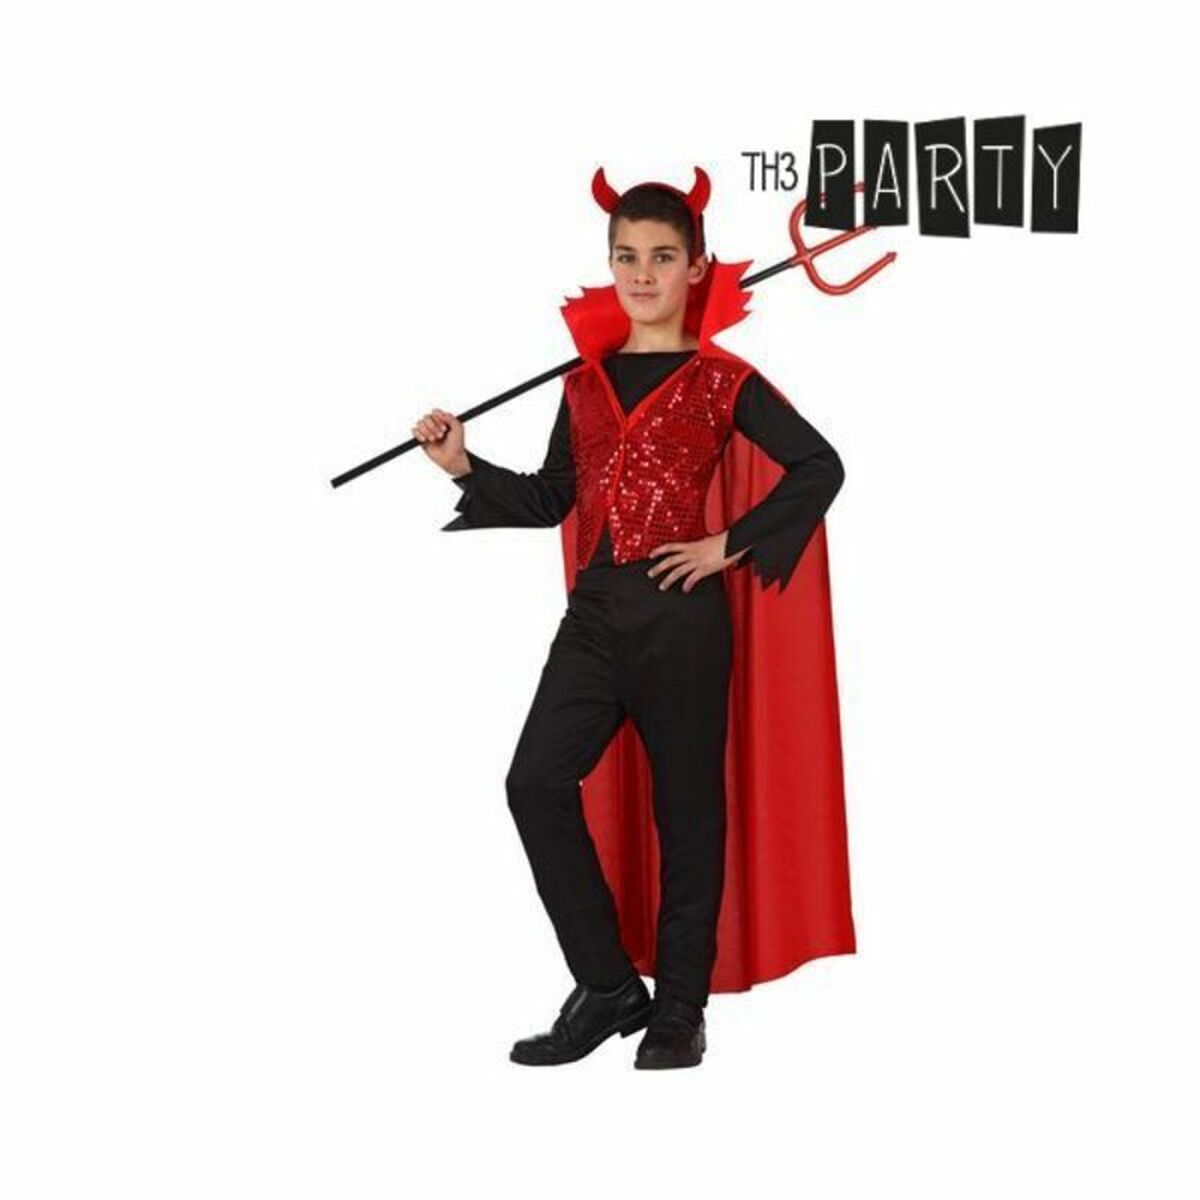 Costume for Children Th3 Party 5261 Multicolour Male Demon 3-4 Years